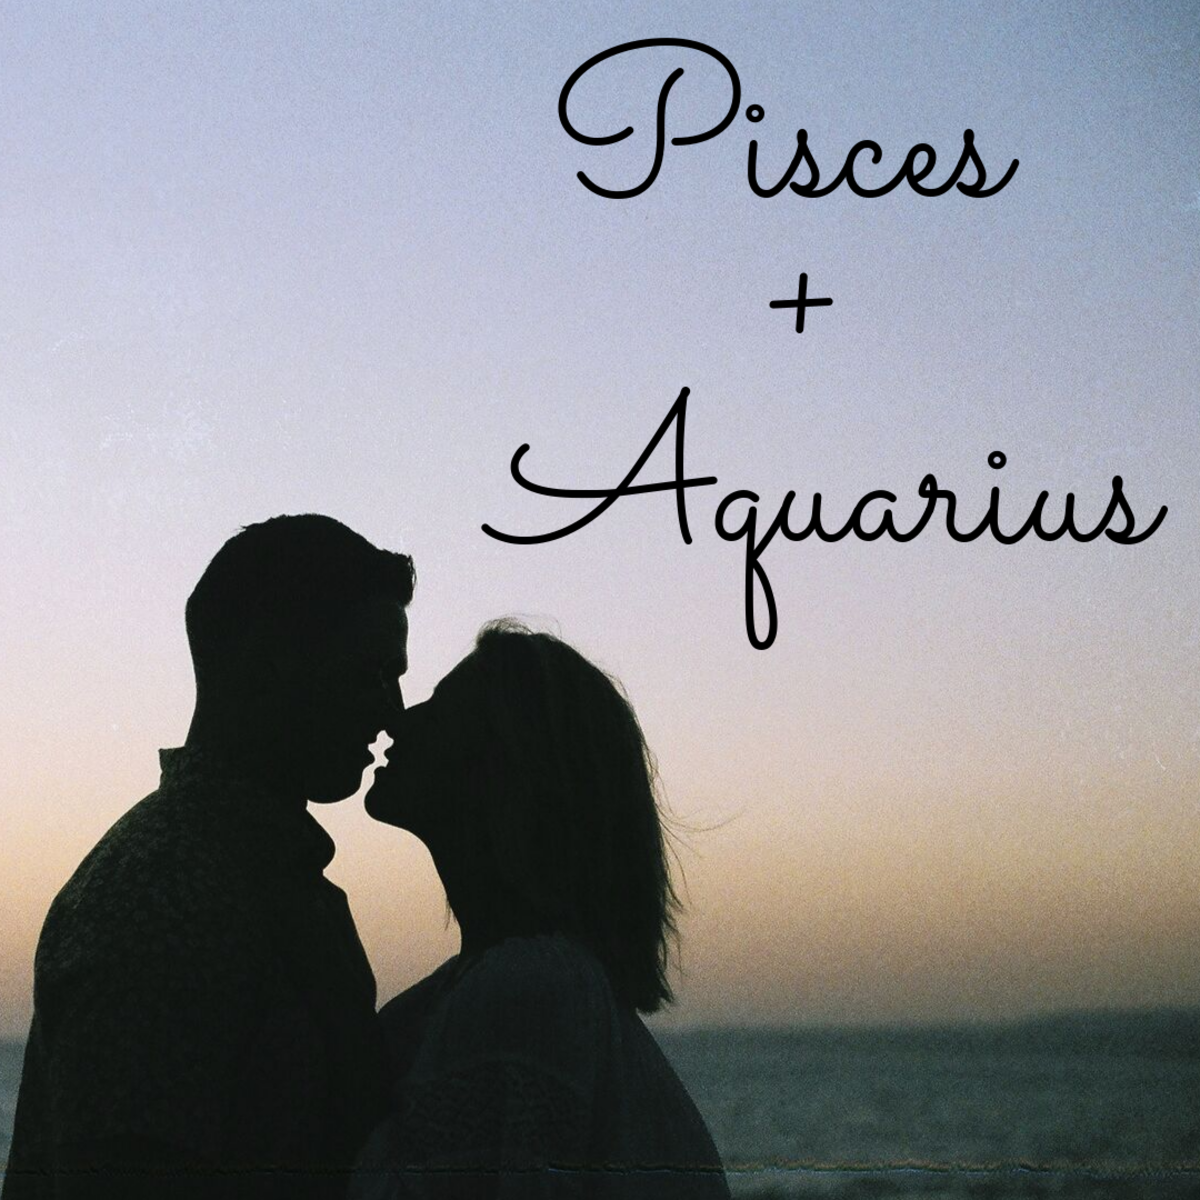 A hurt woman when pisces is When a